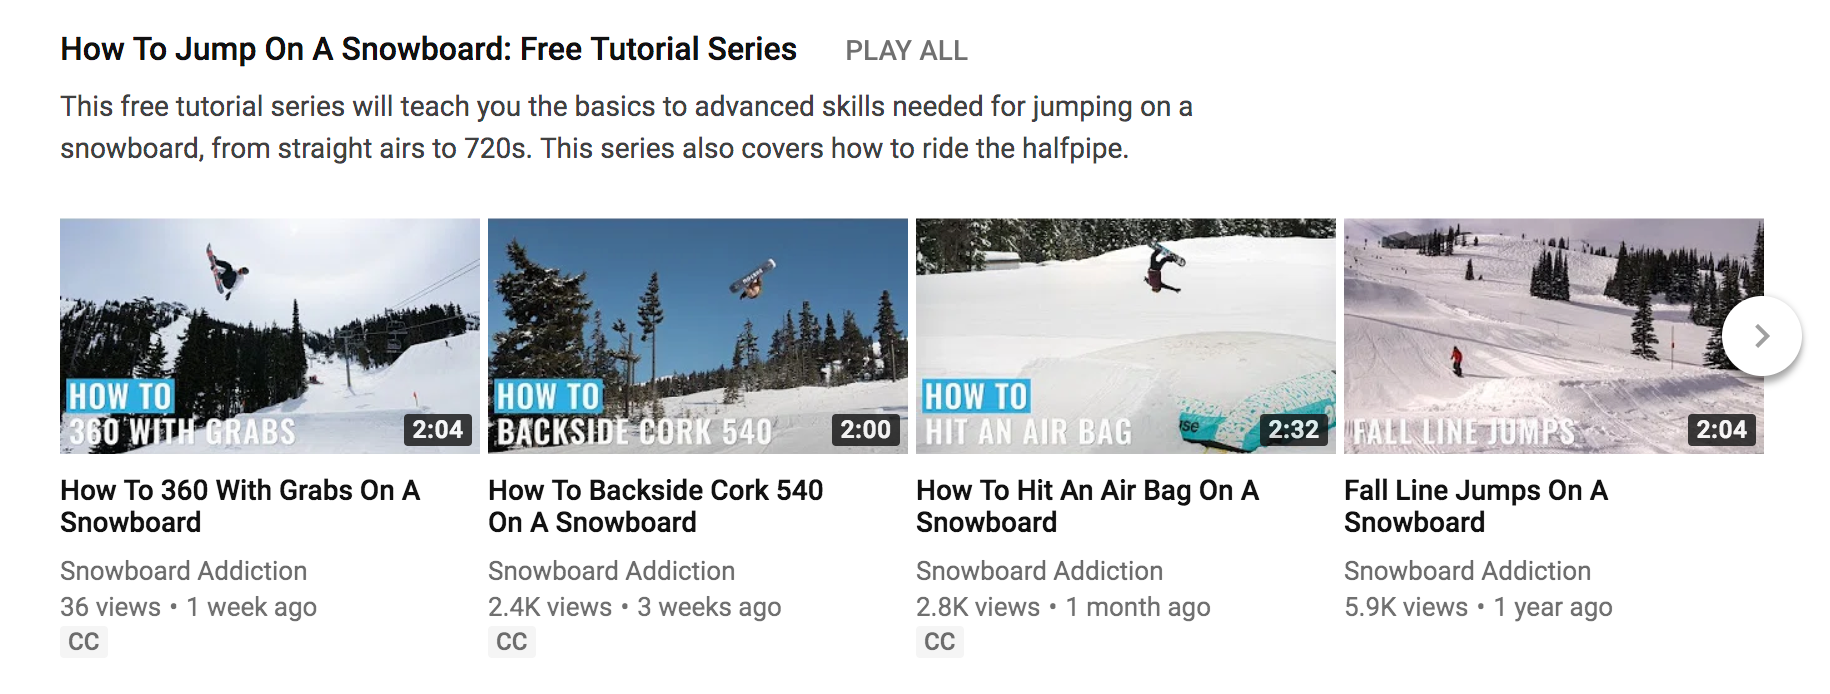 Youtube for business: here's an example of how-to videos and educational content from Snowboard Addiction